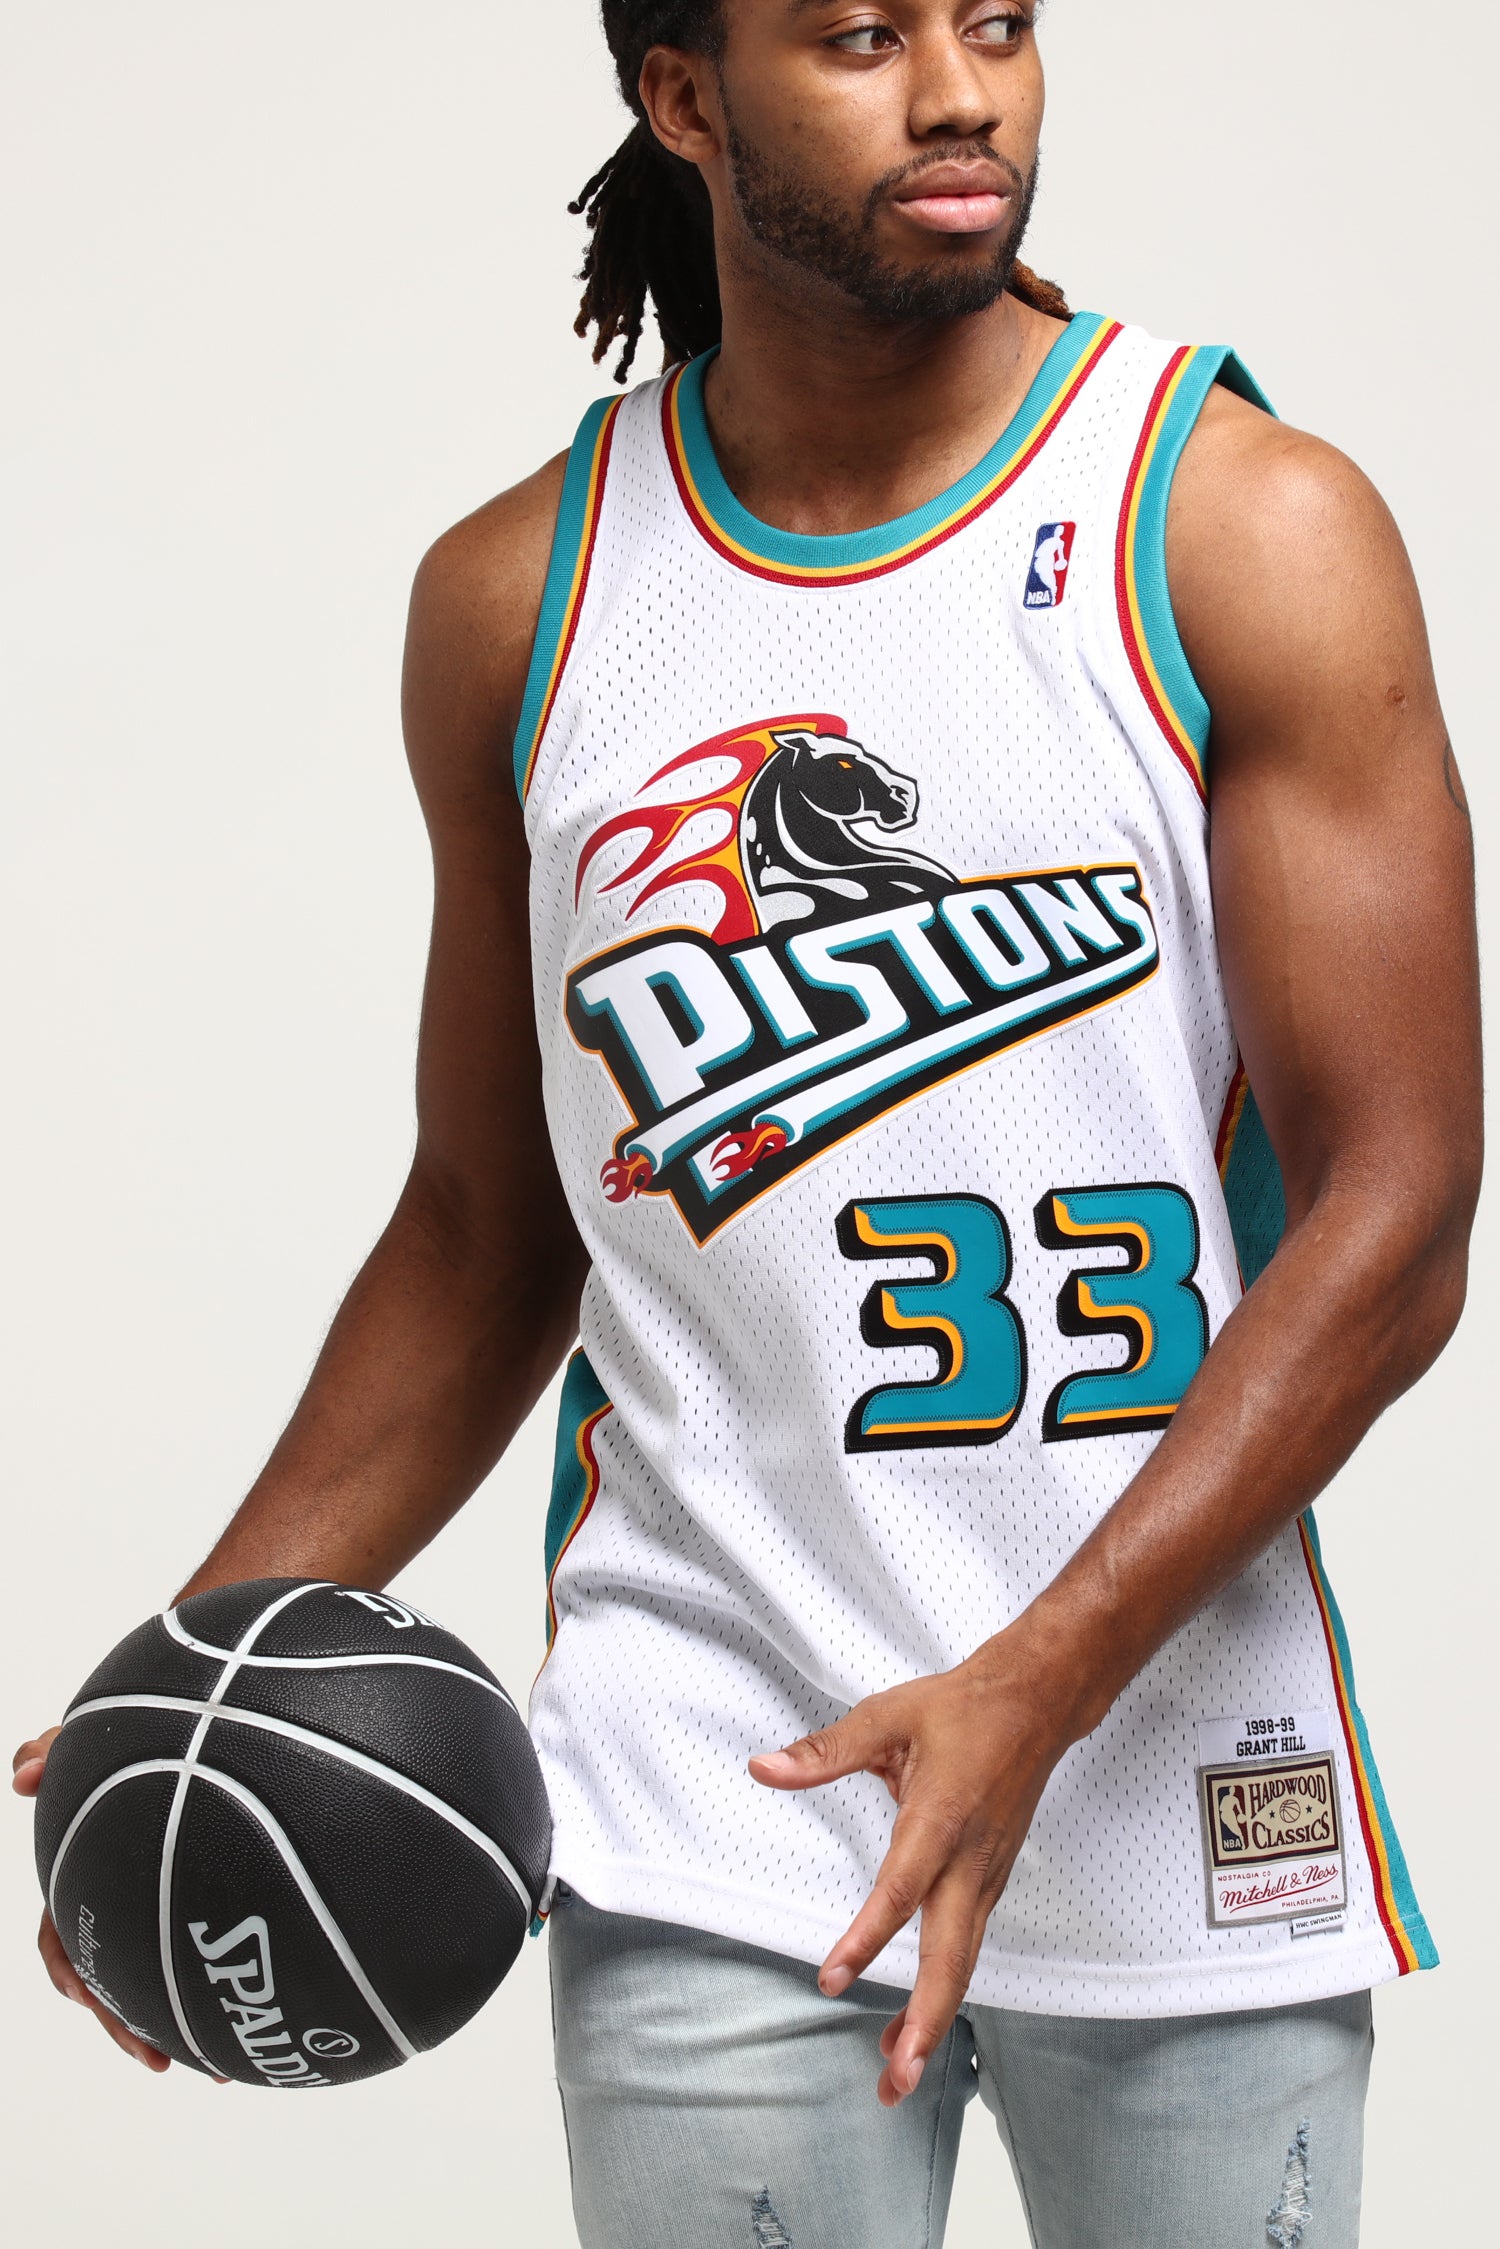 grant hill pistons jersey mitchell and ness